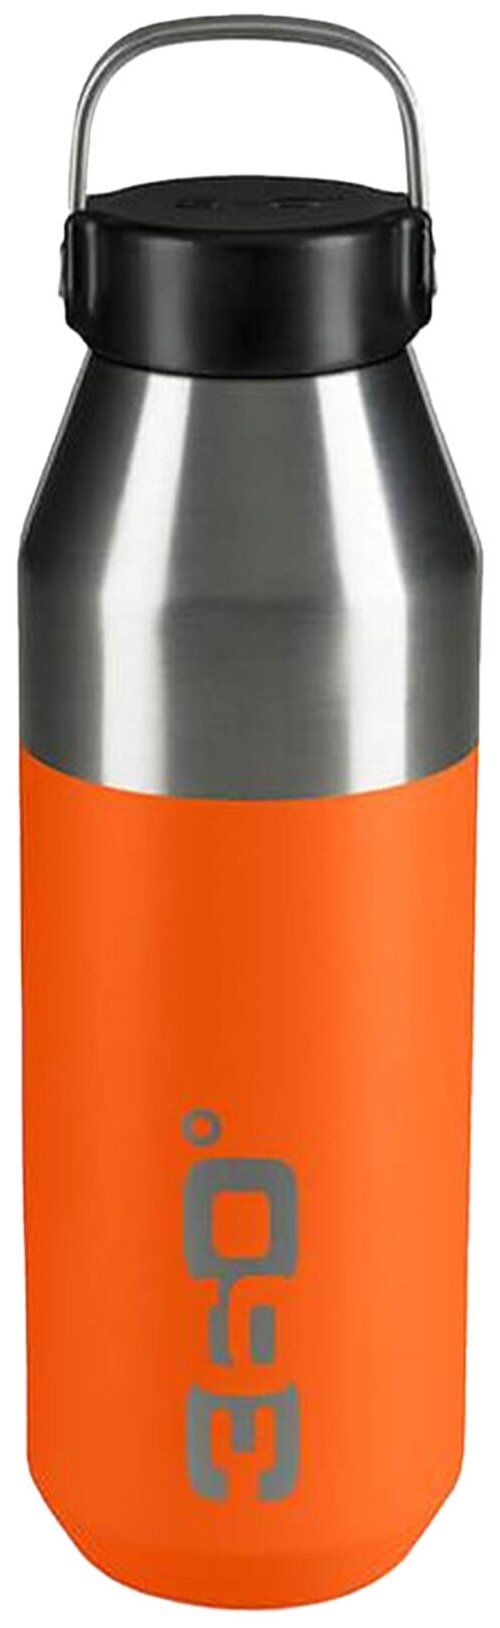 Термос 360 degrees Vacuum Insulated Stainless Narrow Mouth Bottle 750ML PM - фотография № 1